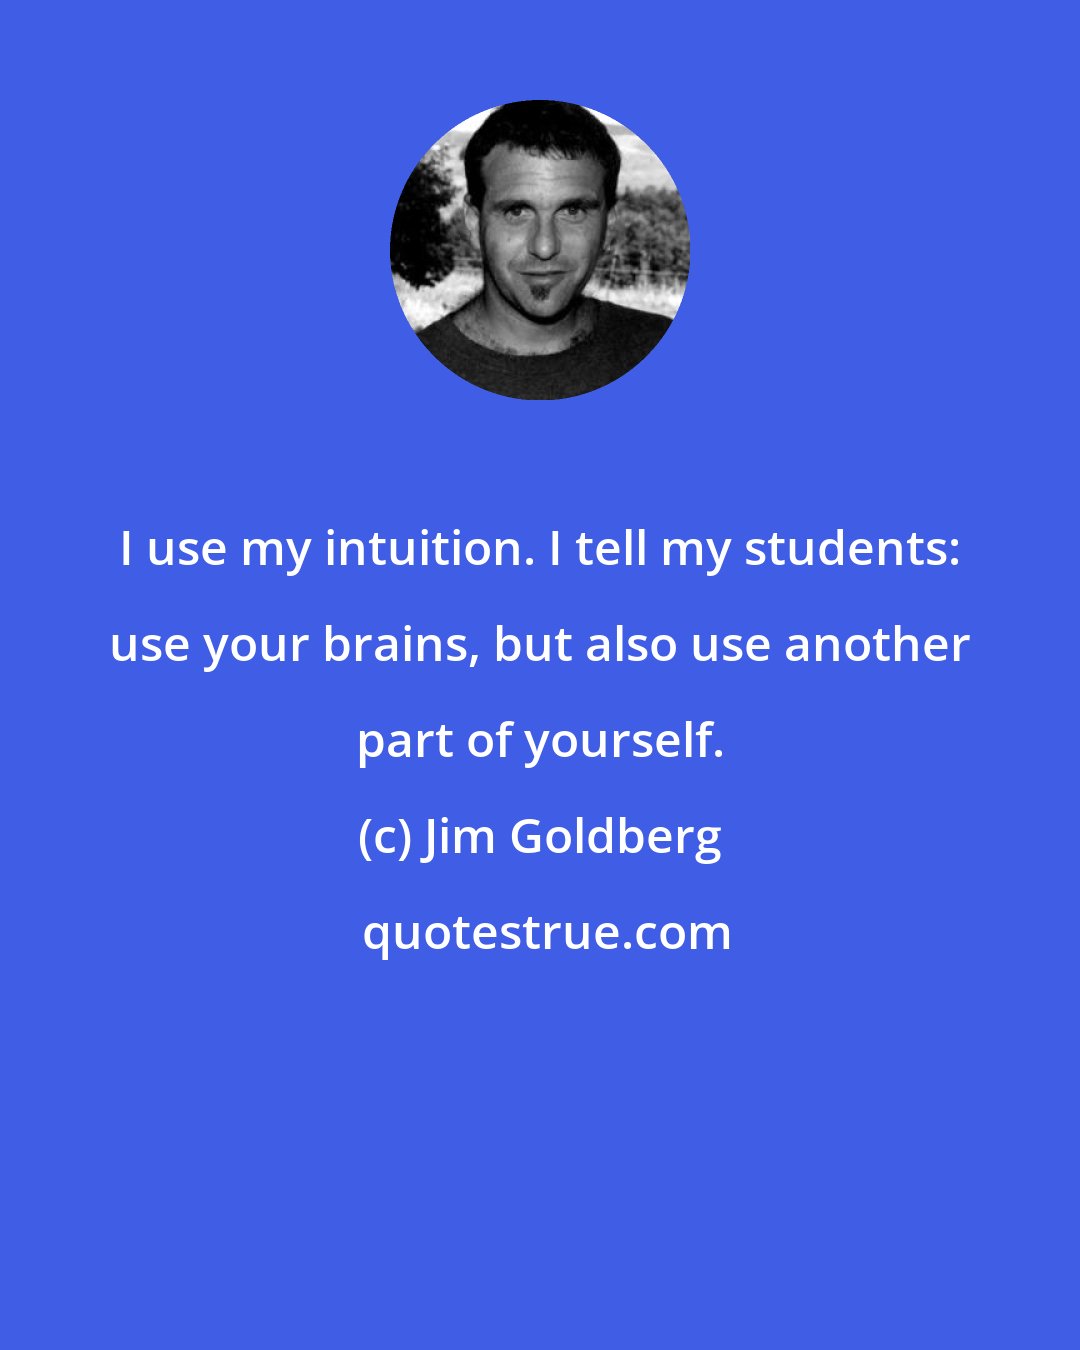 Jim Goldberg: I use my intuition. I tell my students: use your brains, but also use another part of yourself.